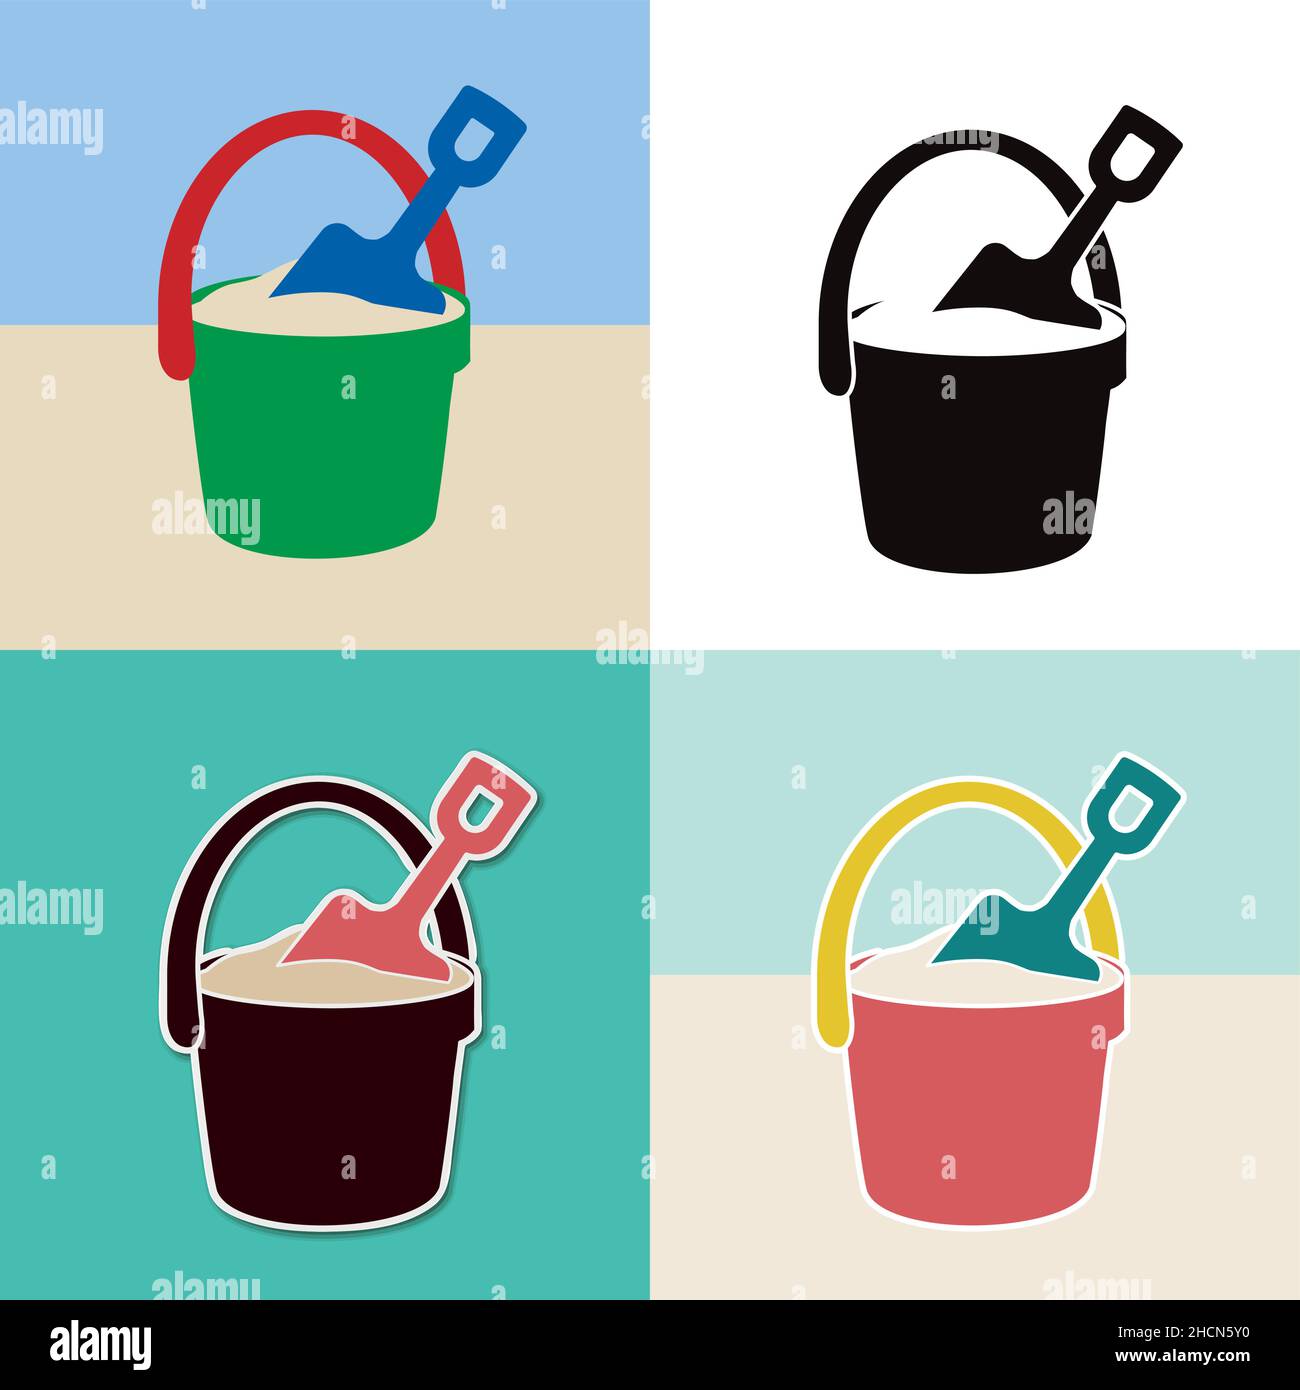 vector illustration of pail and shovel toy set in pop art style Stock Vector